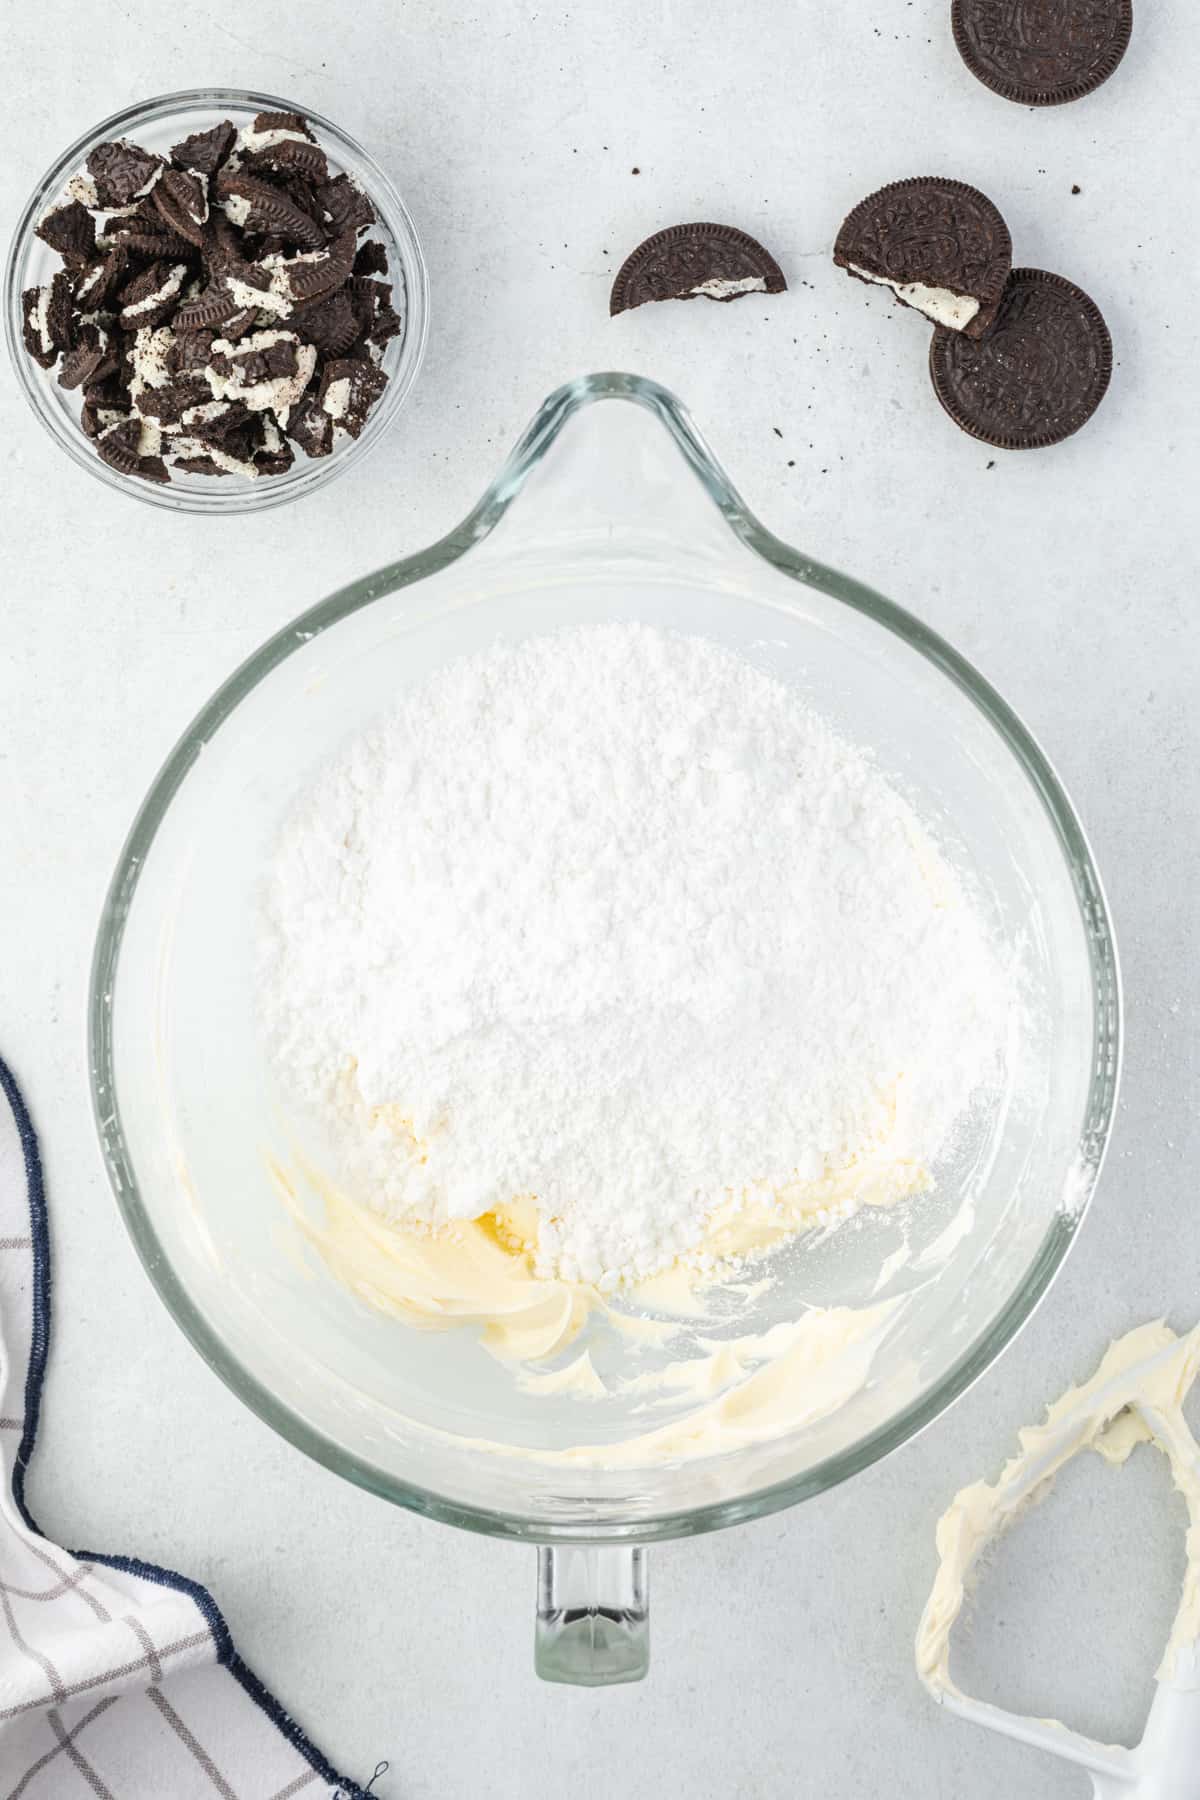 creamed butter and powdered sugar in a glass mixing bowl